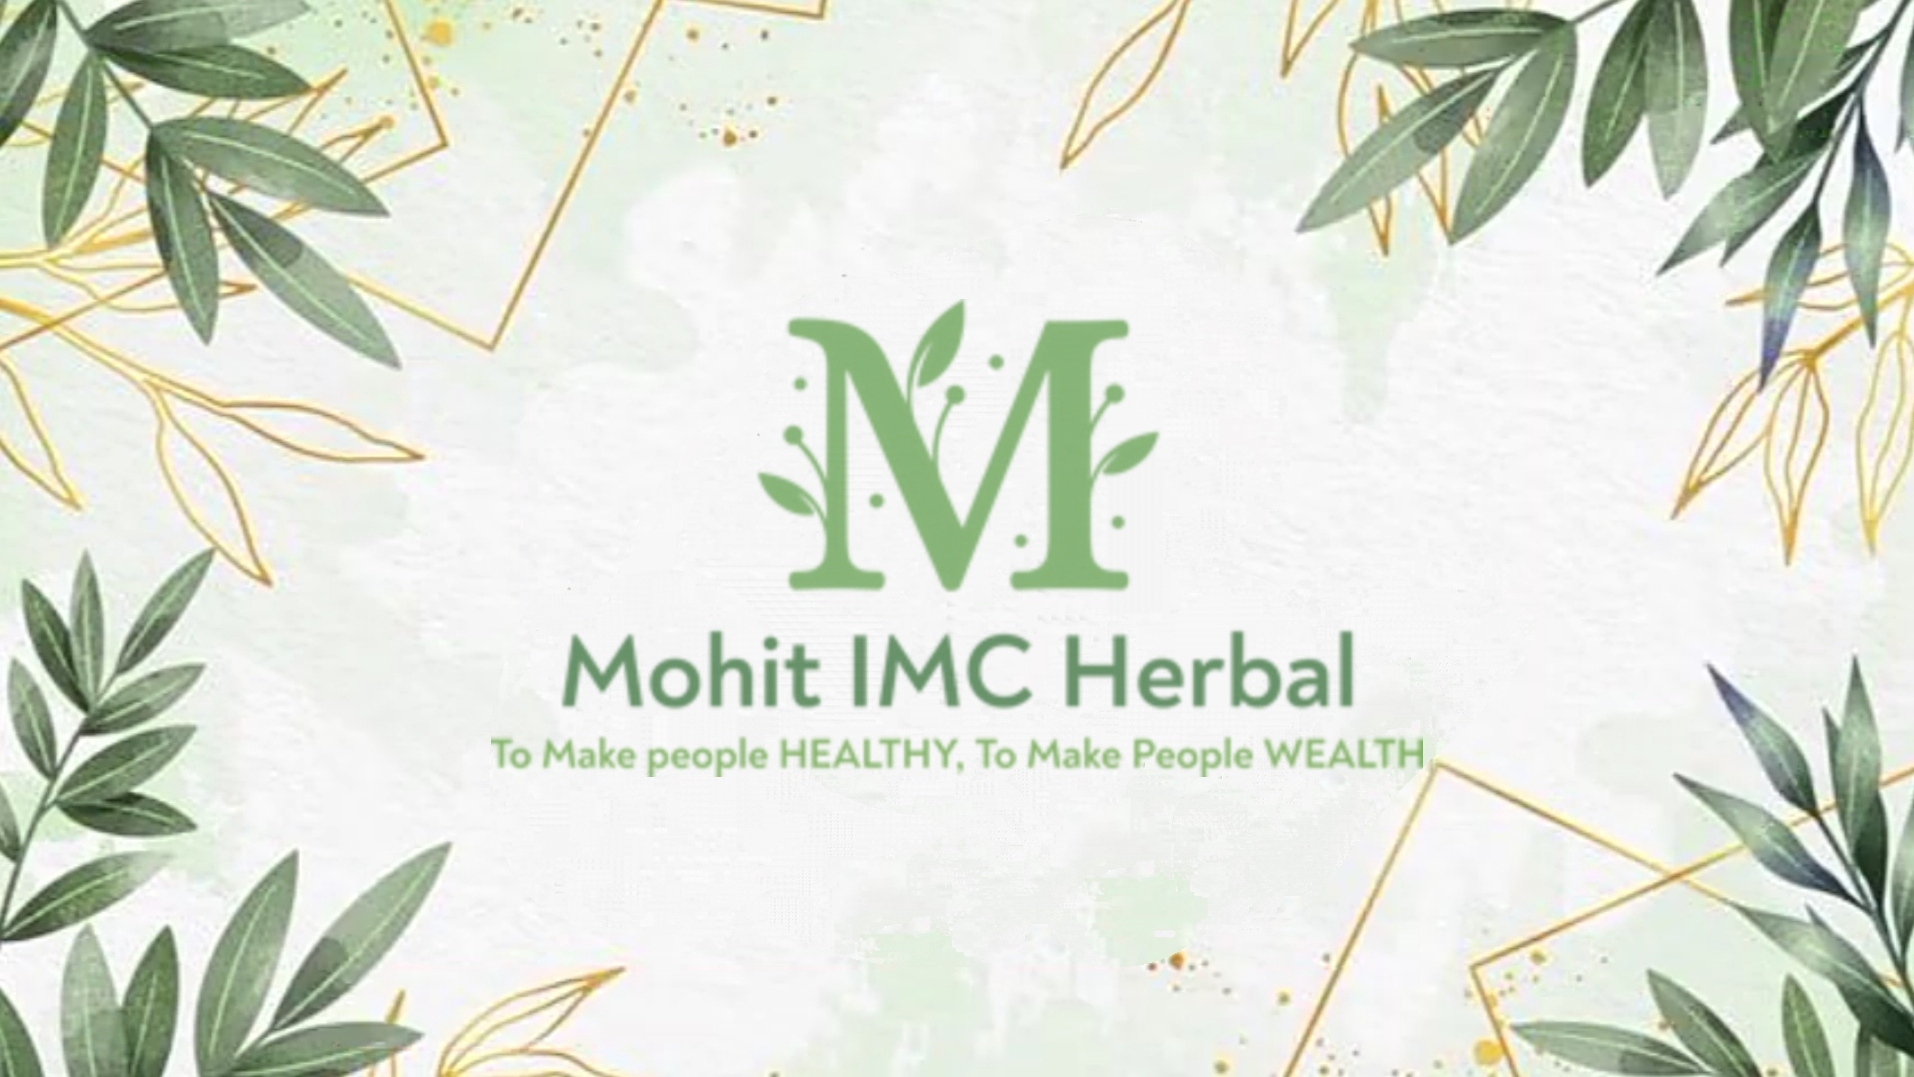 Download IMC Logo PNG and Vector (PDF, SVG, Ai, EPS) Free